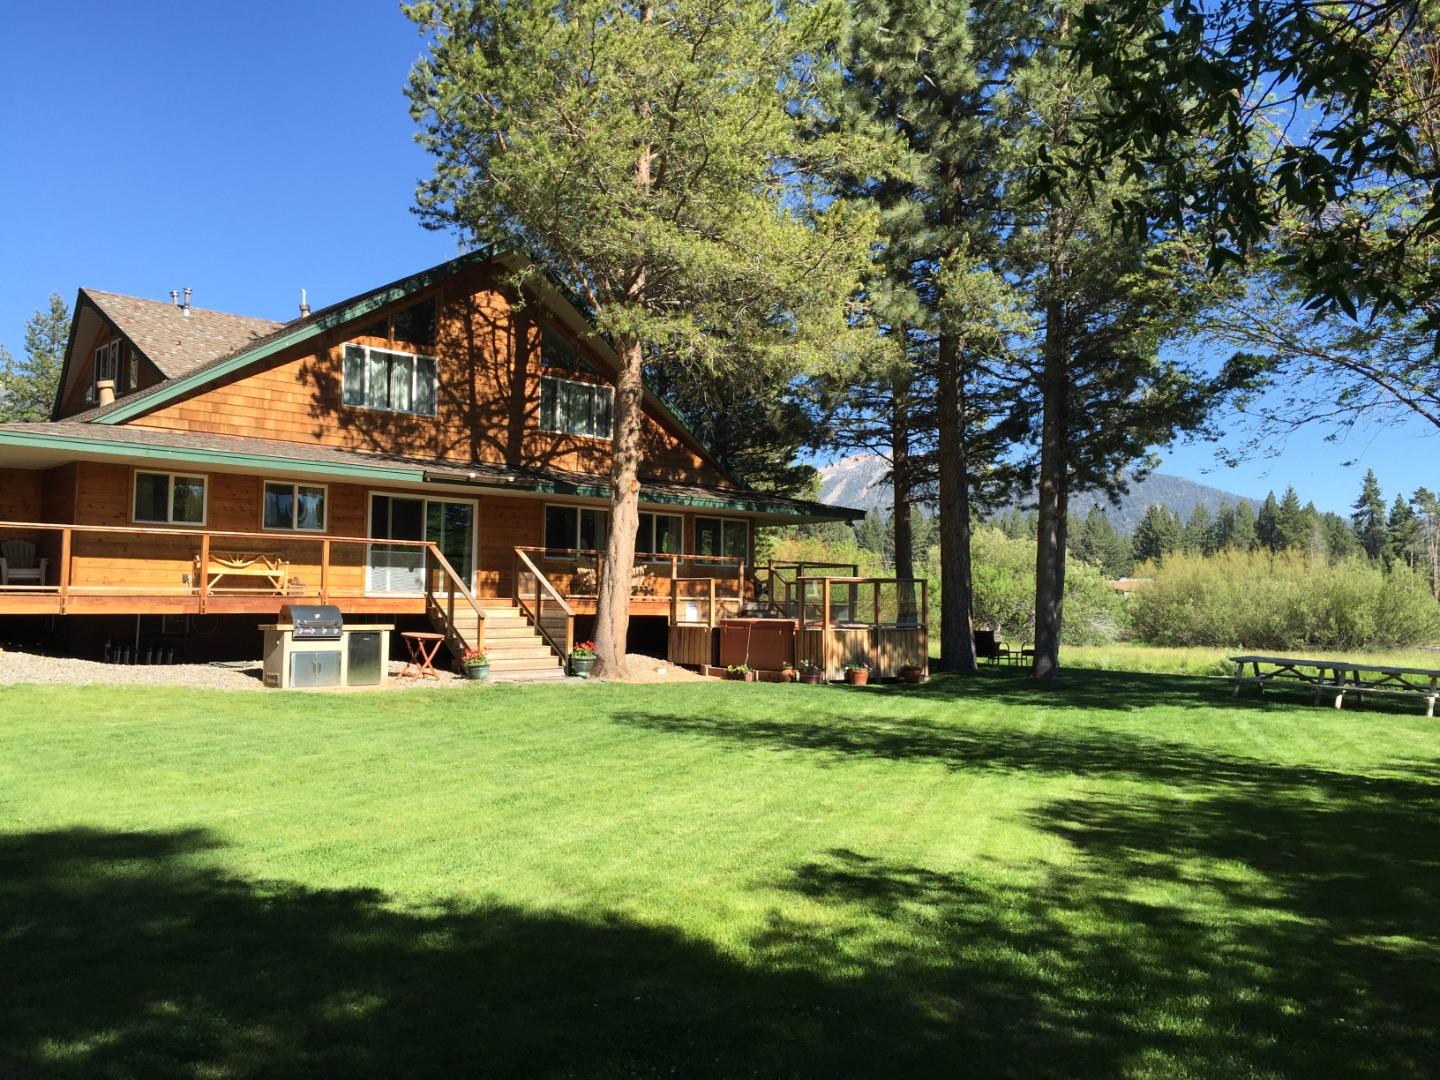 Photo of 2861 Oakland Ave in South Lake Tahoe, CA